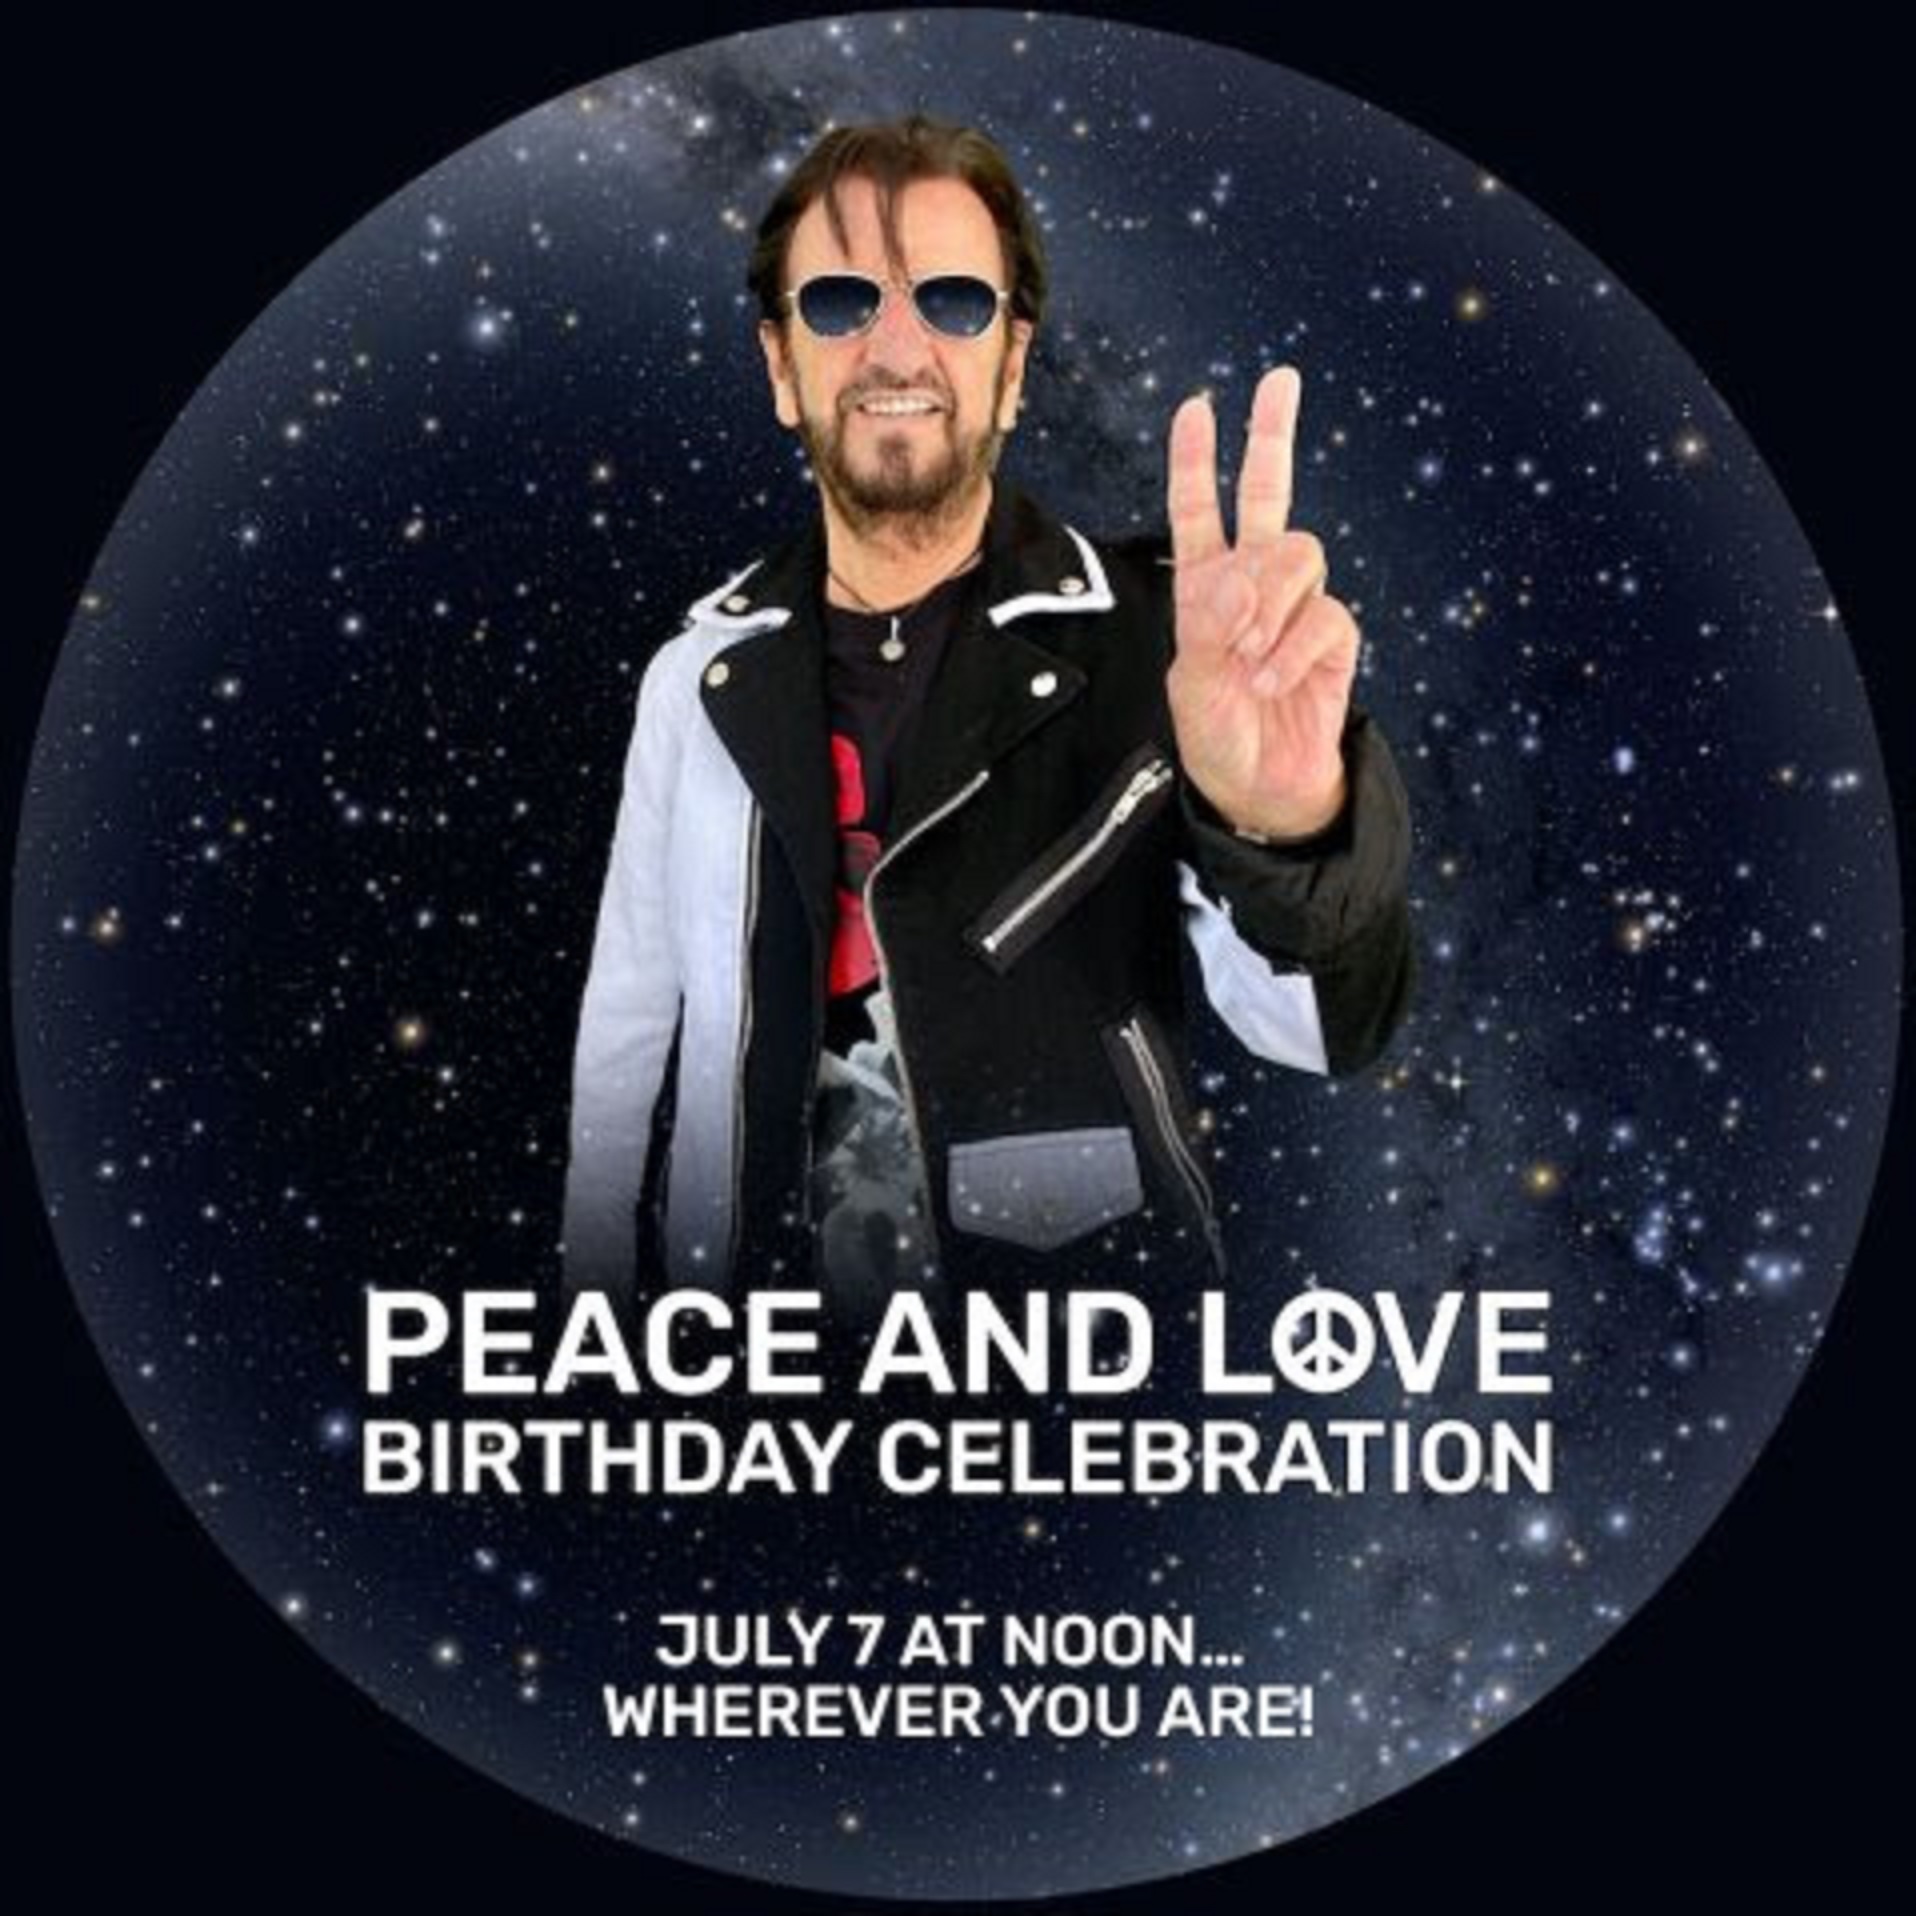 RINGO CELEBRATES HIS BIRTHDAY WITH HIS ANNUAL CAMPAIGN FOR PEACE & LOVE WHICH INCLUDES 26 CELEBRATIONS IN COUNTRIES AROUND THE WORLD